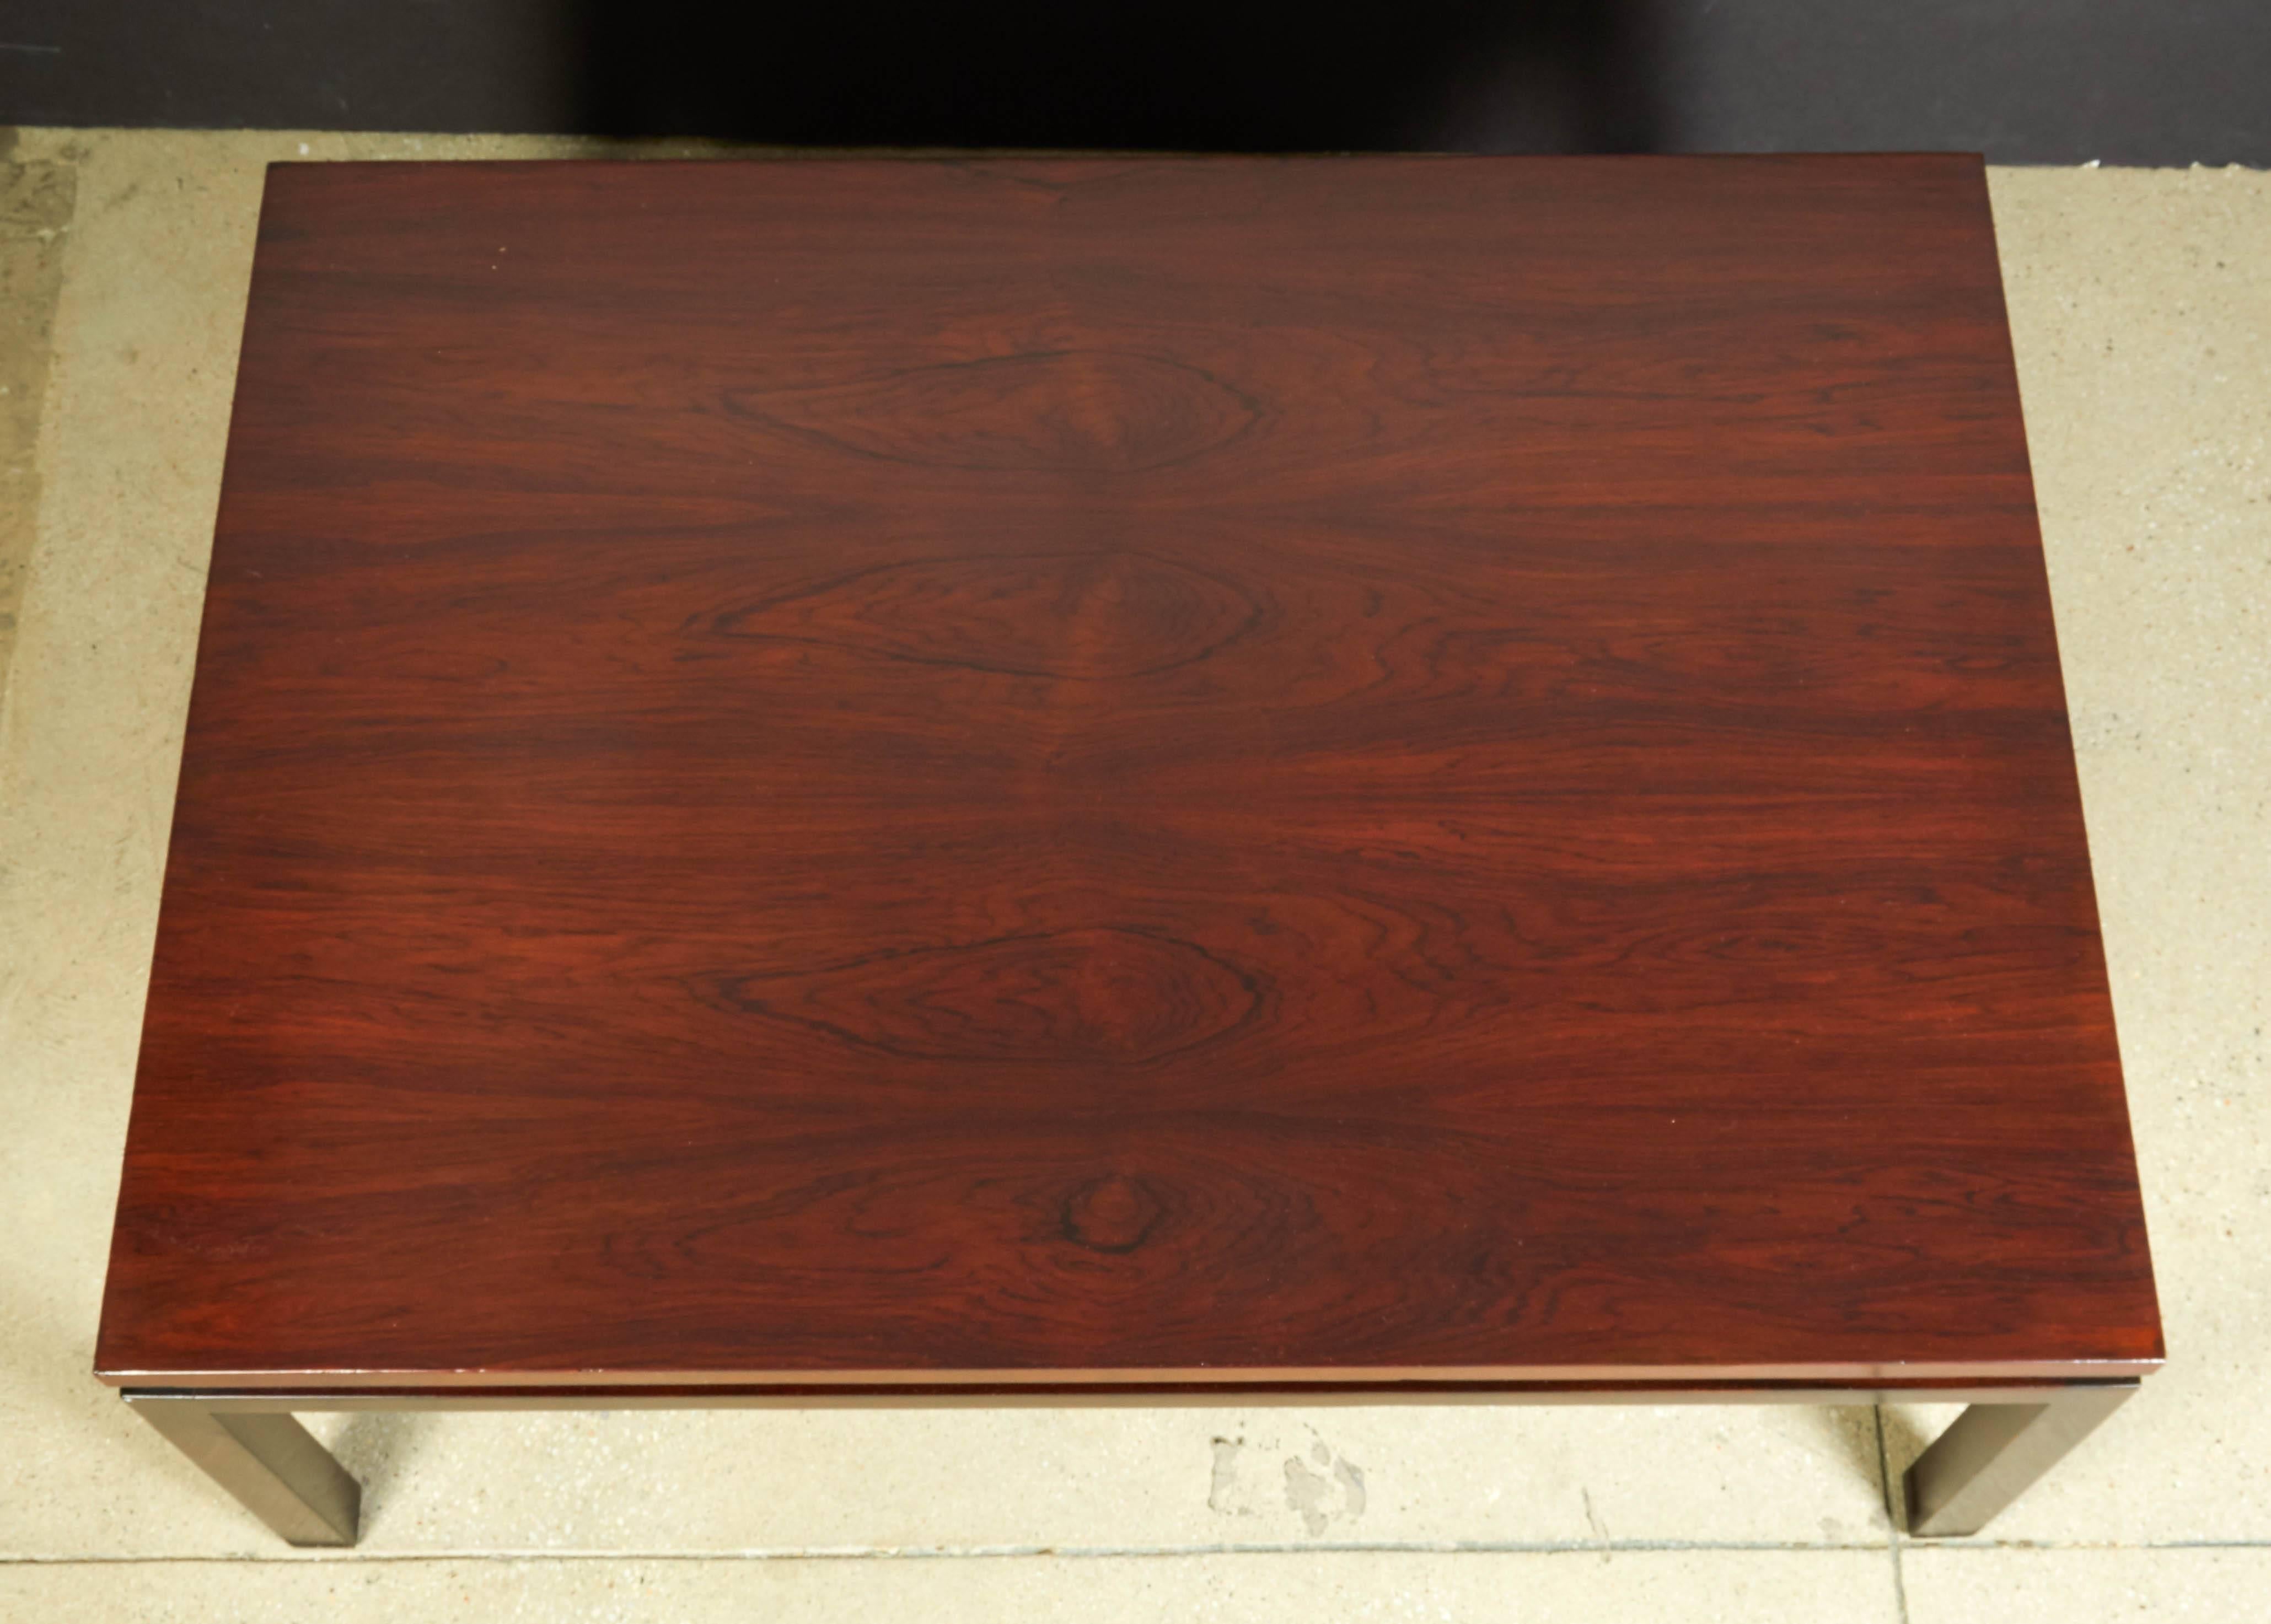 Rosewood top coffee table with dark walnut finished base, circa 1960, in the manner of Harvey Probber.